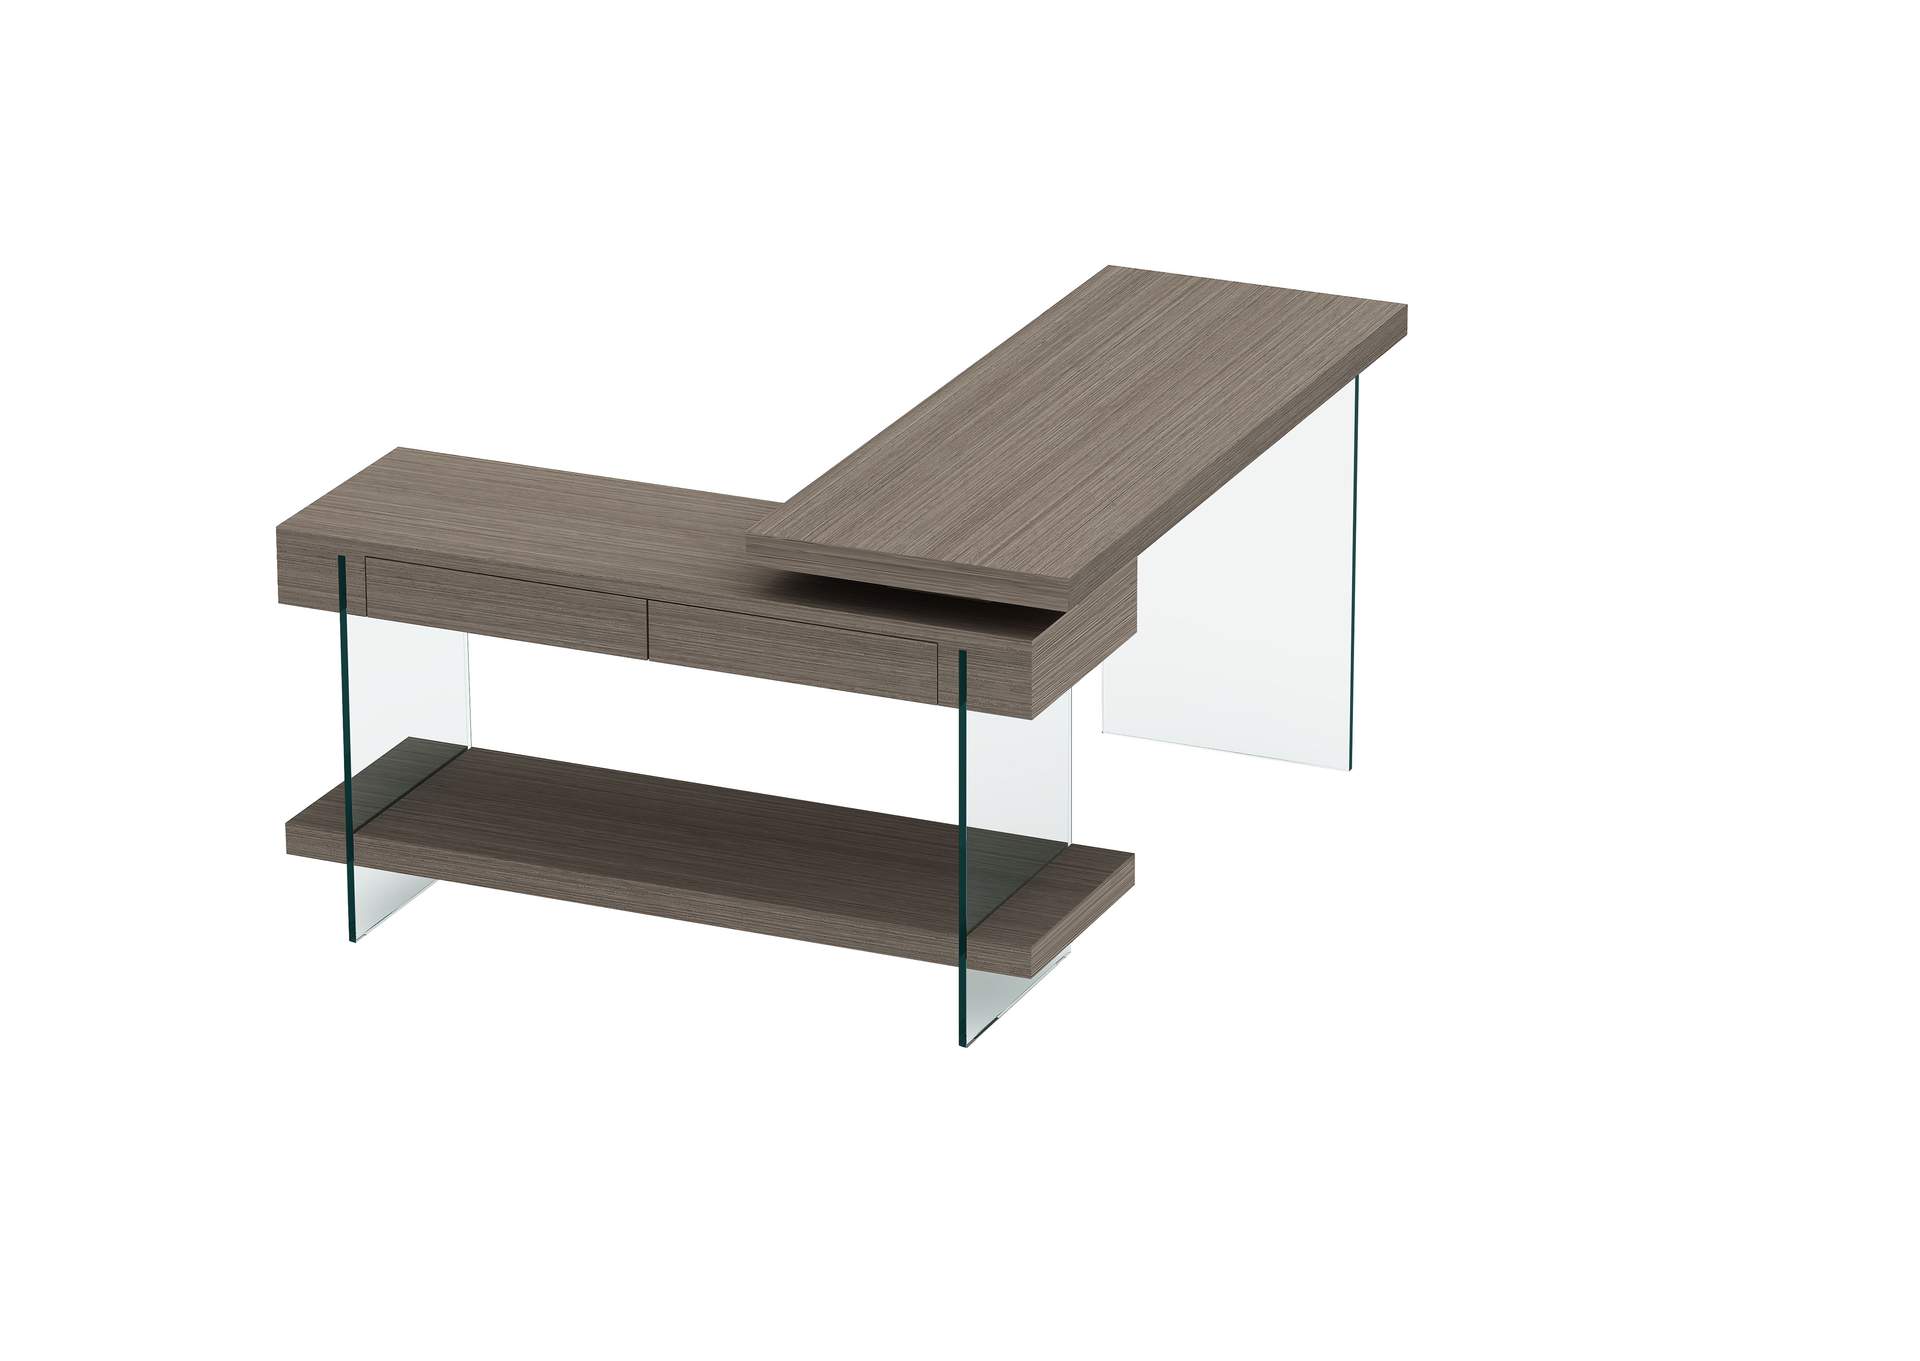 Modern Rotatable Glass & Wooden Desk w/ Drawers & Shelf,Chintaly Imports